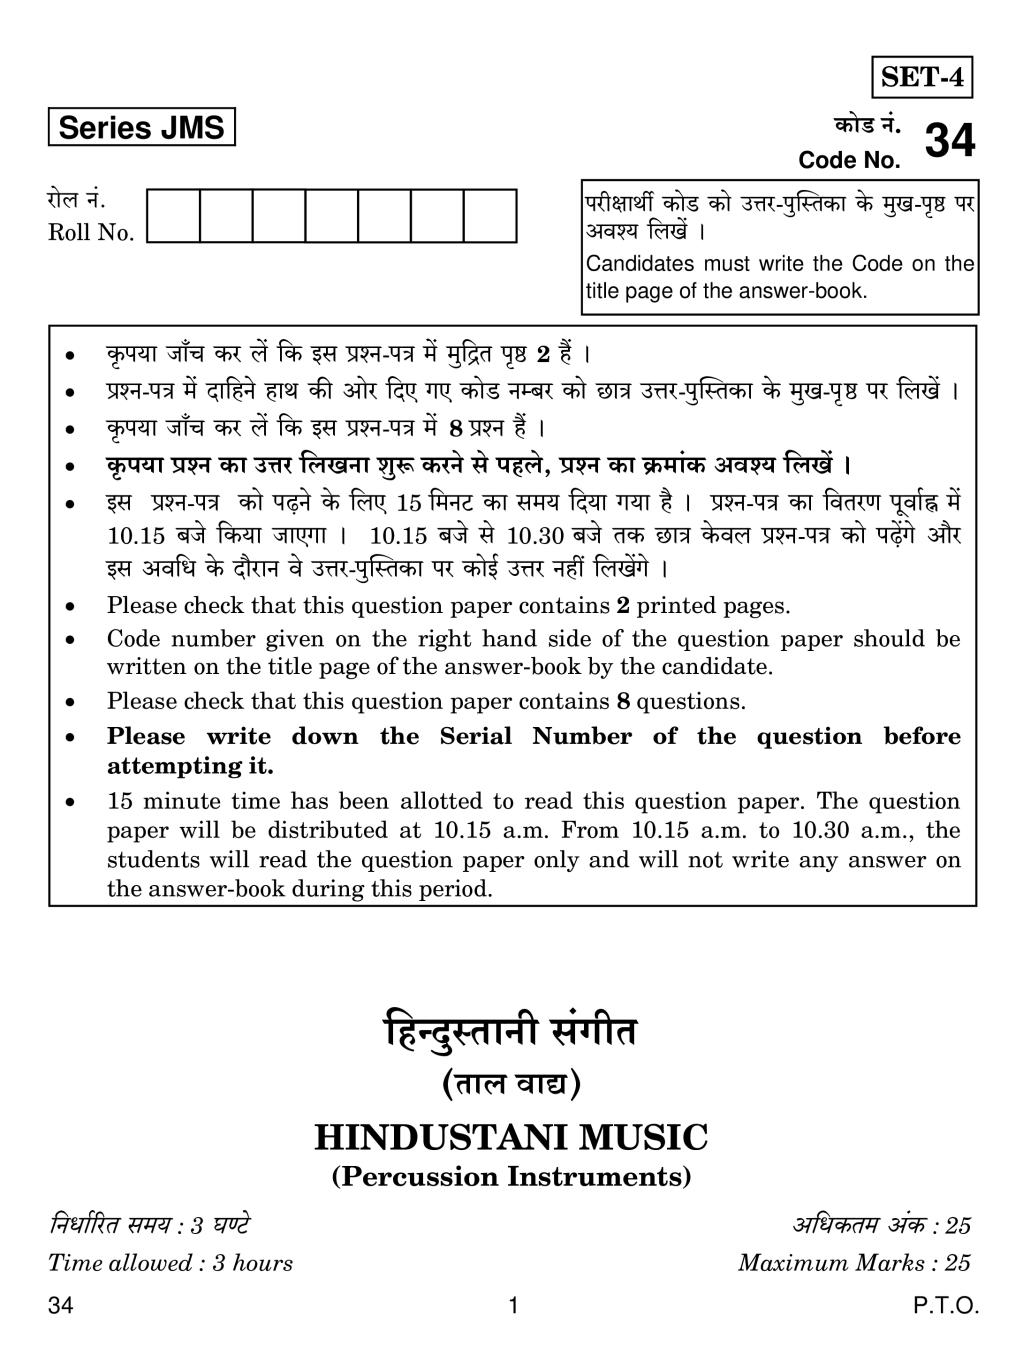 CBSE Class 10 Hindustani Music (percussion instrument) Question Paper 2019 - Page 1